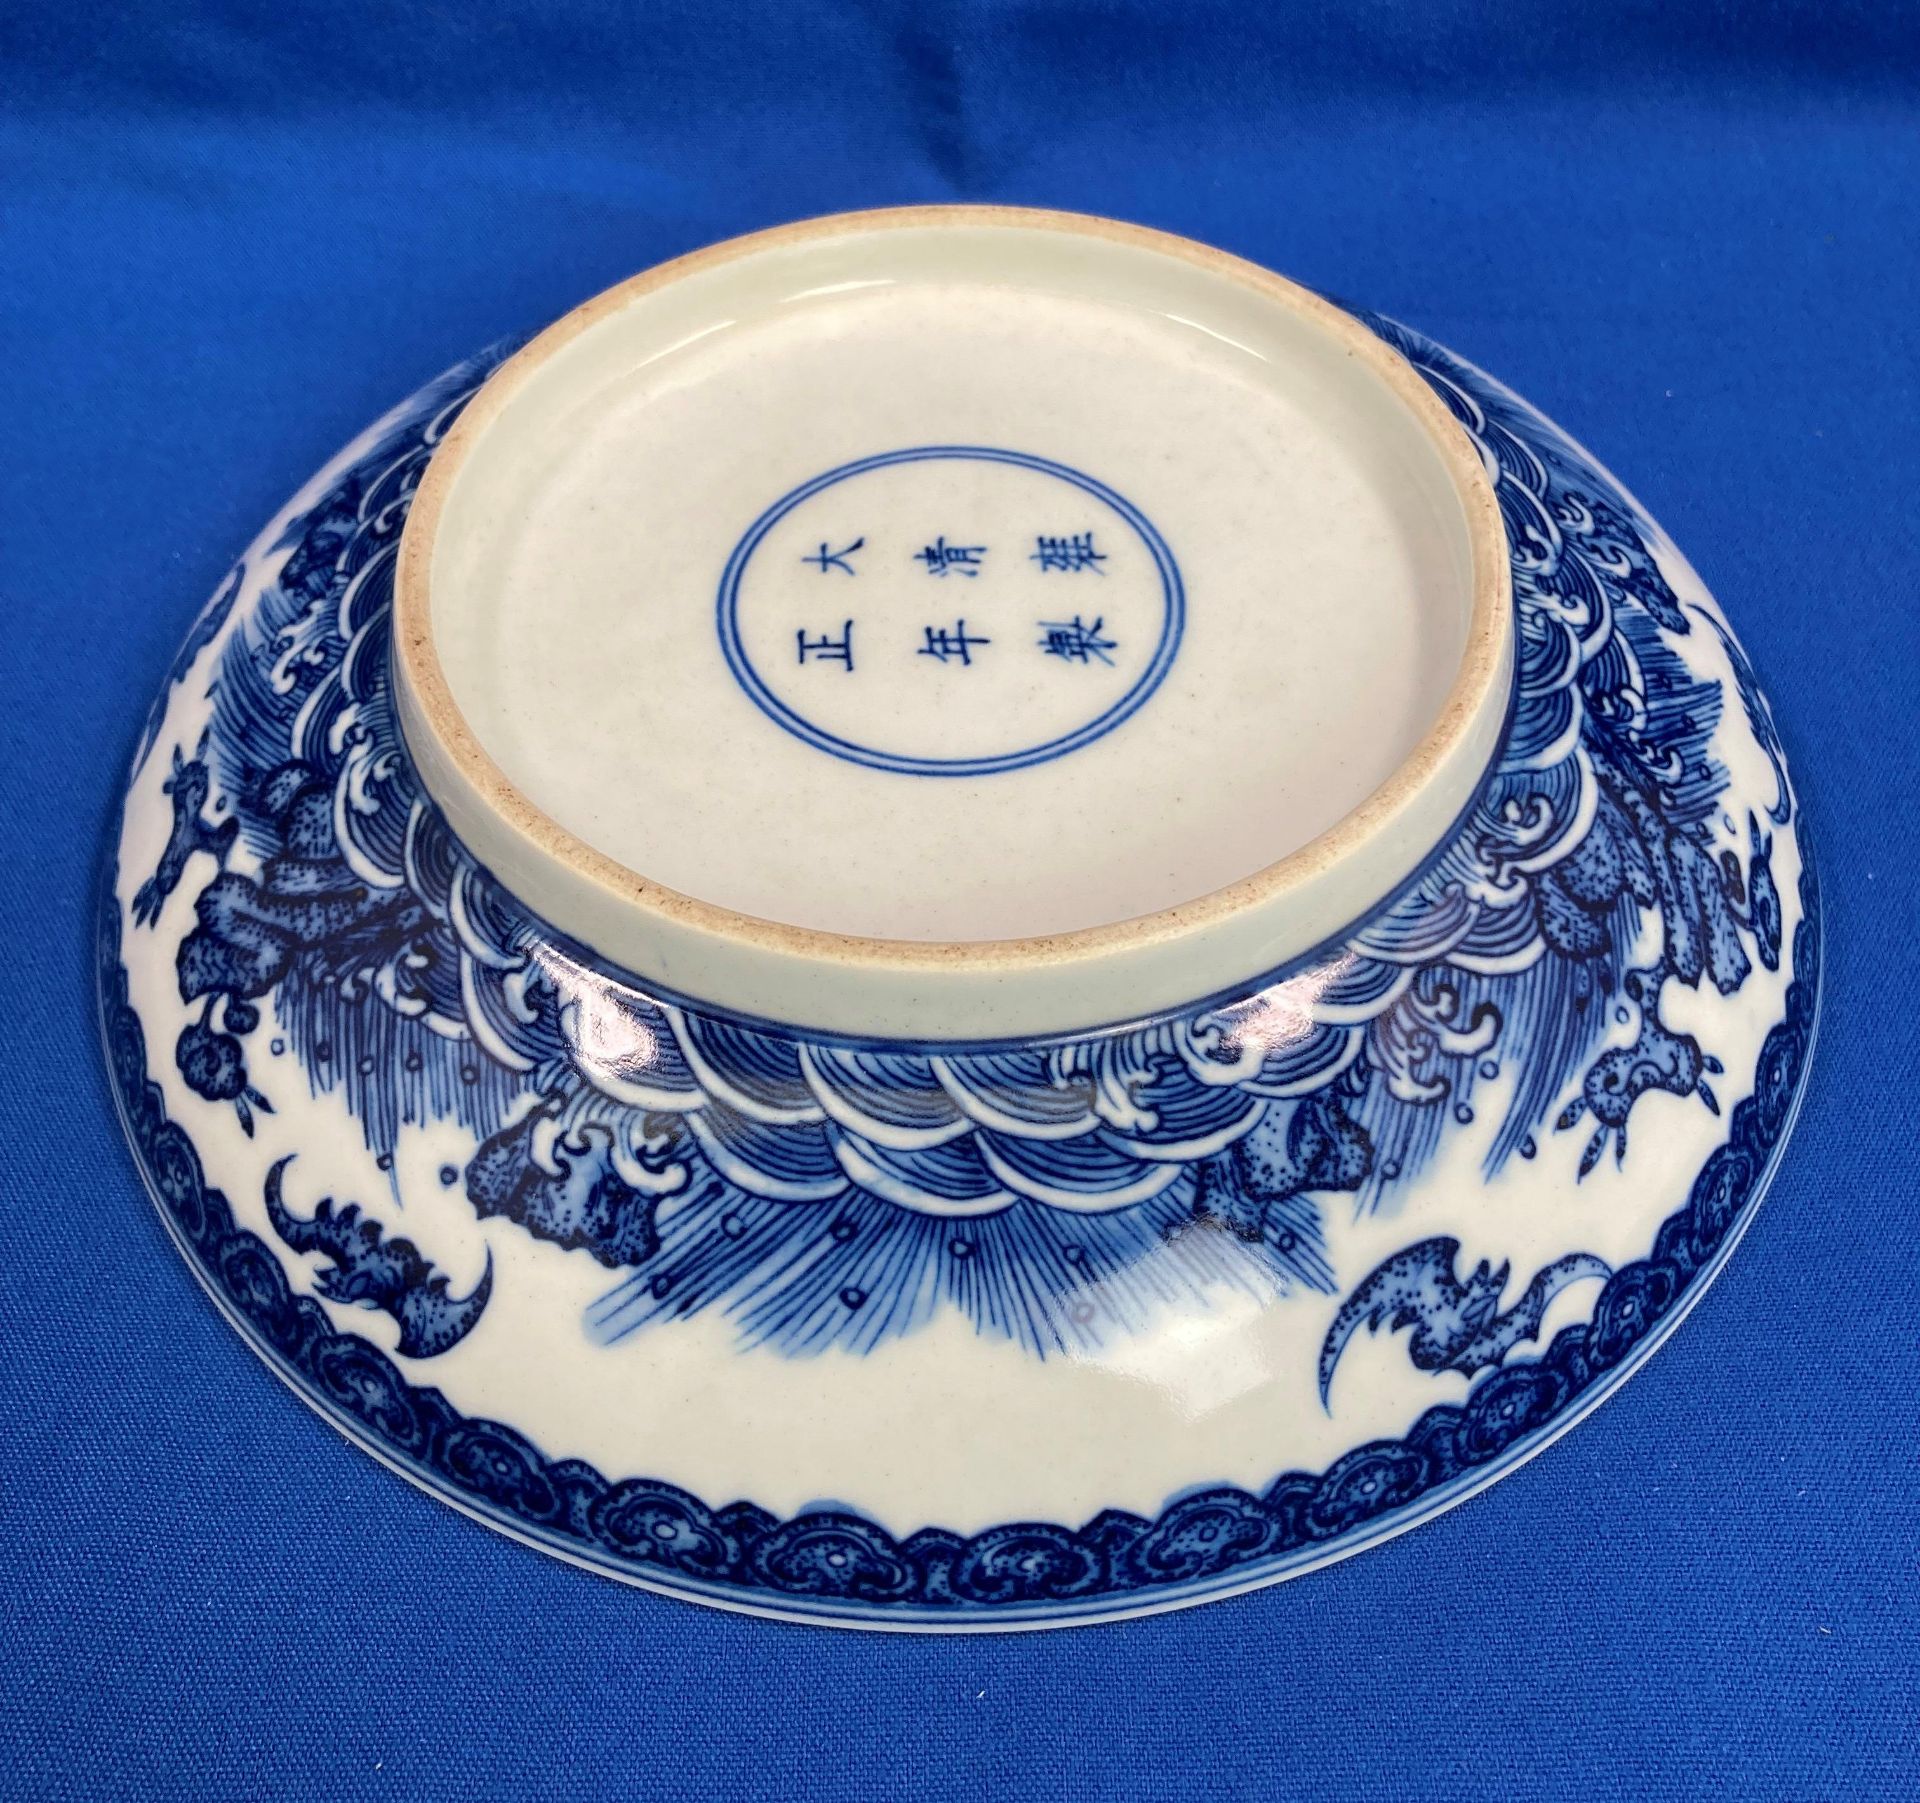 An antique 'Yongzheng' reign blue and white Oriental bowl with fig tree design and six symbol mark - Image 11 of 11